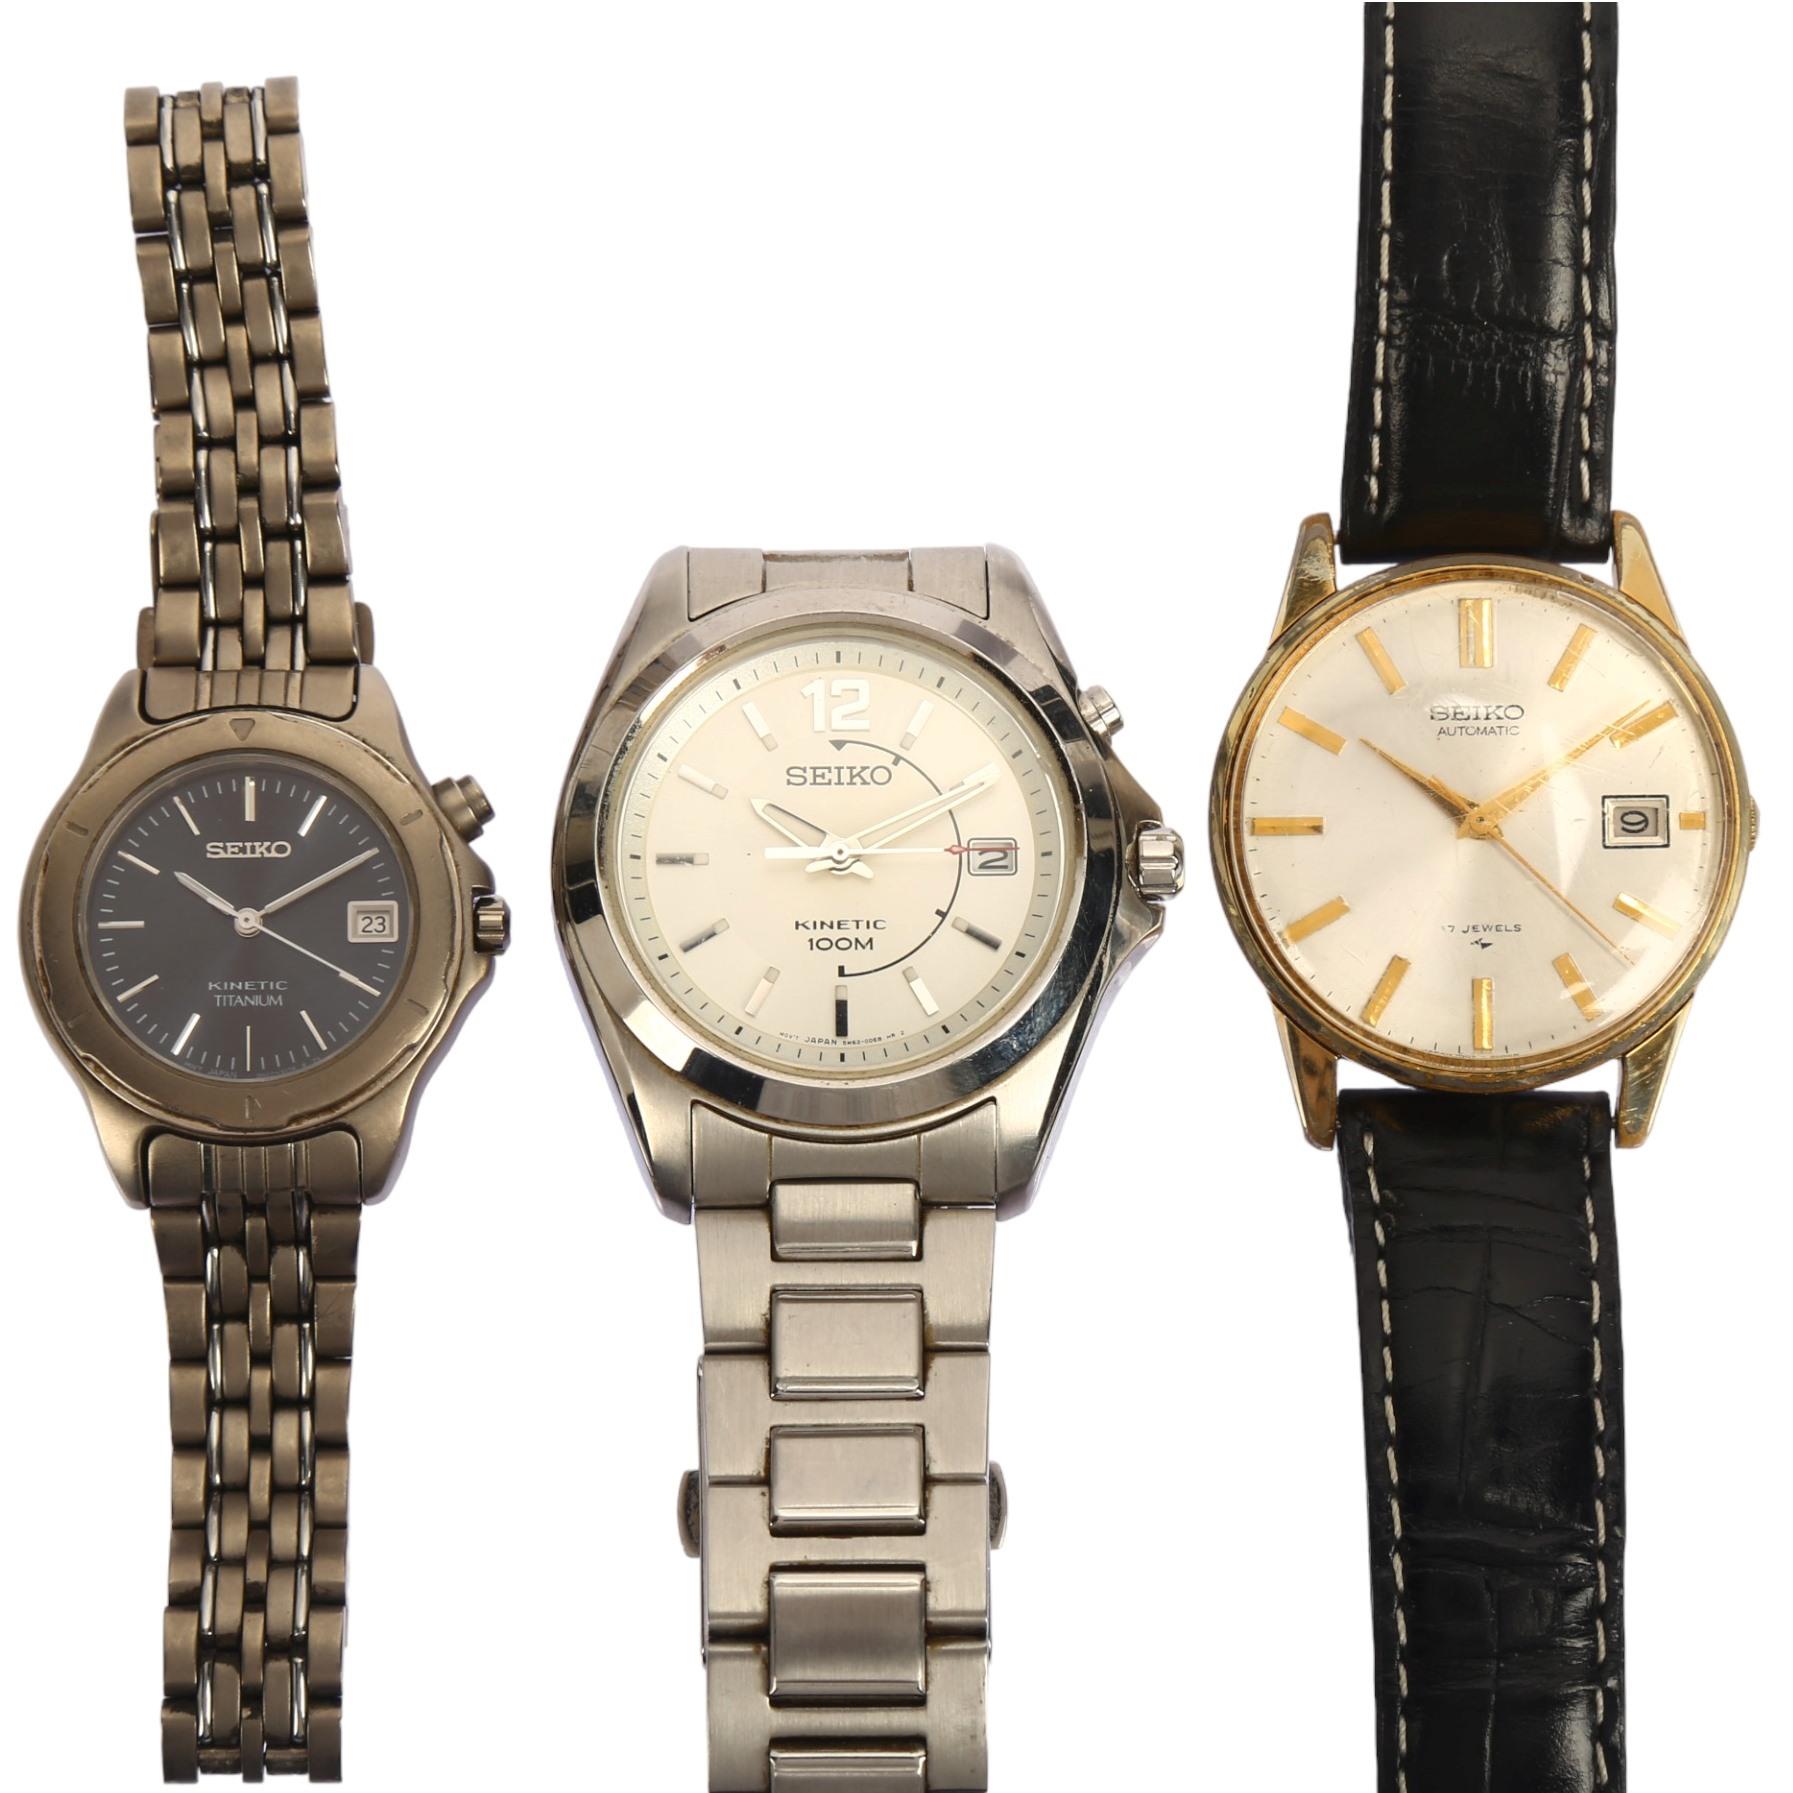 3 x Seiko watches, including Kinetic 100M and Kinetic Titanium, only Kinetic models in working order